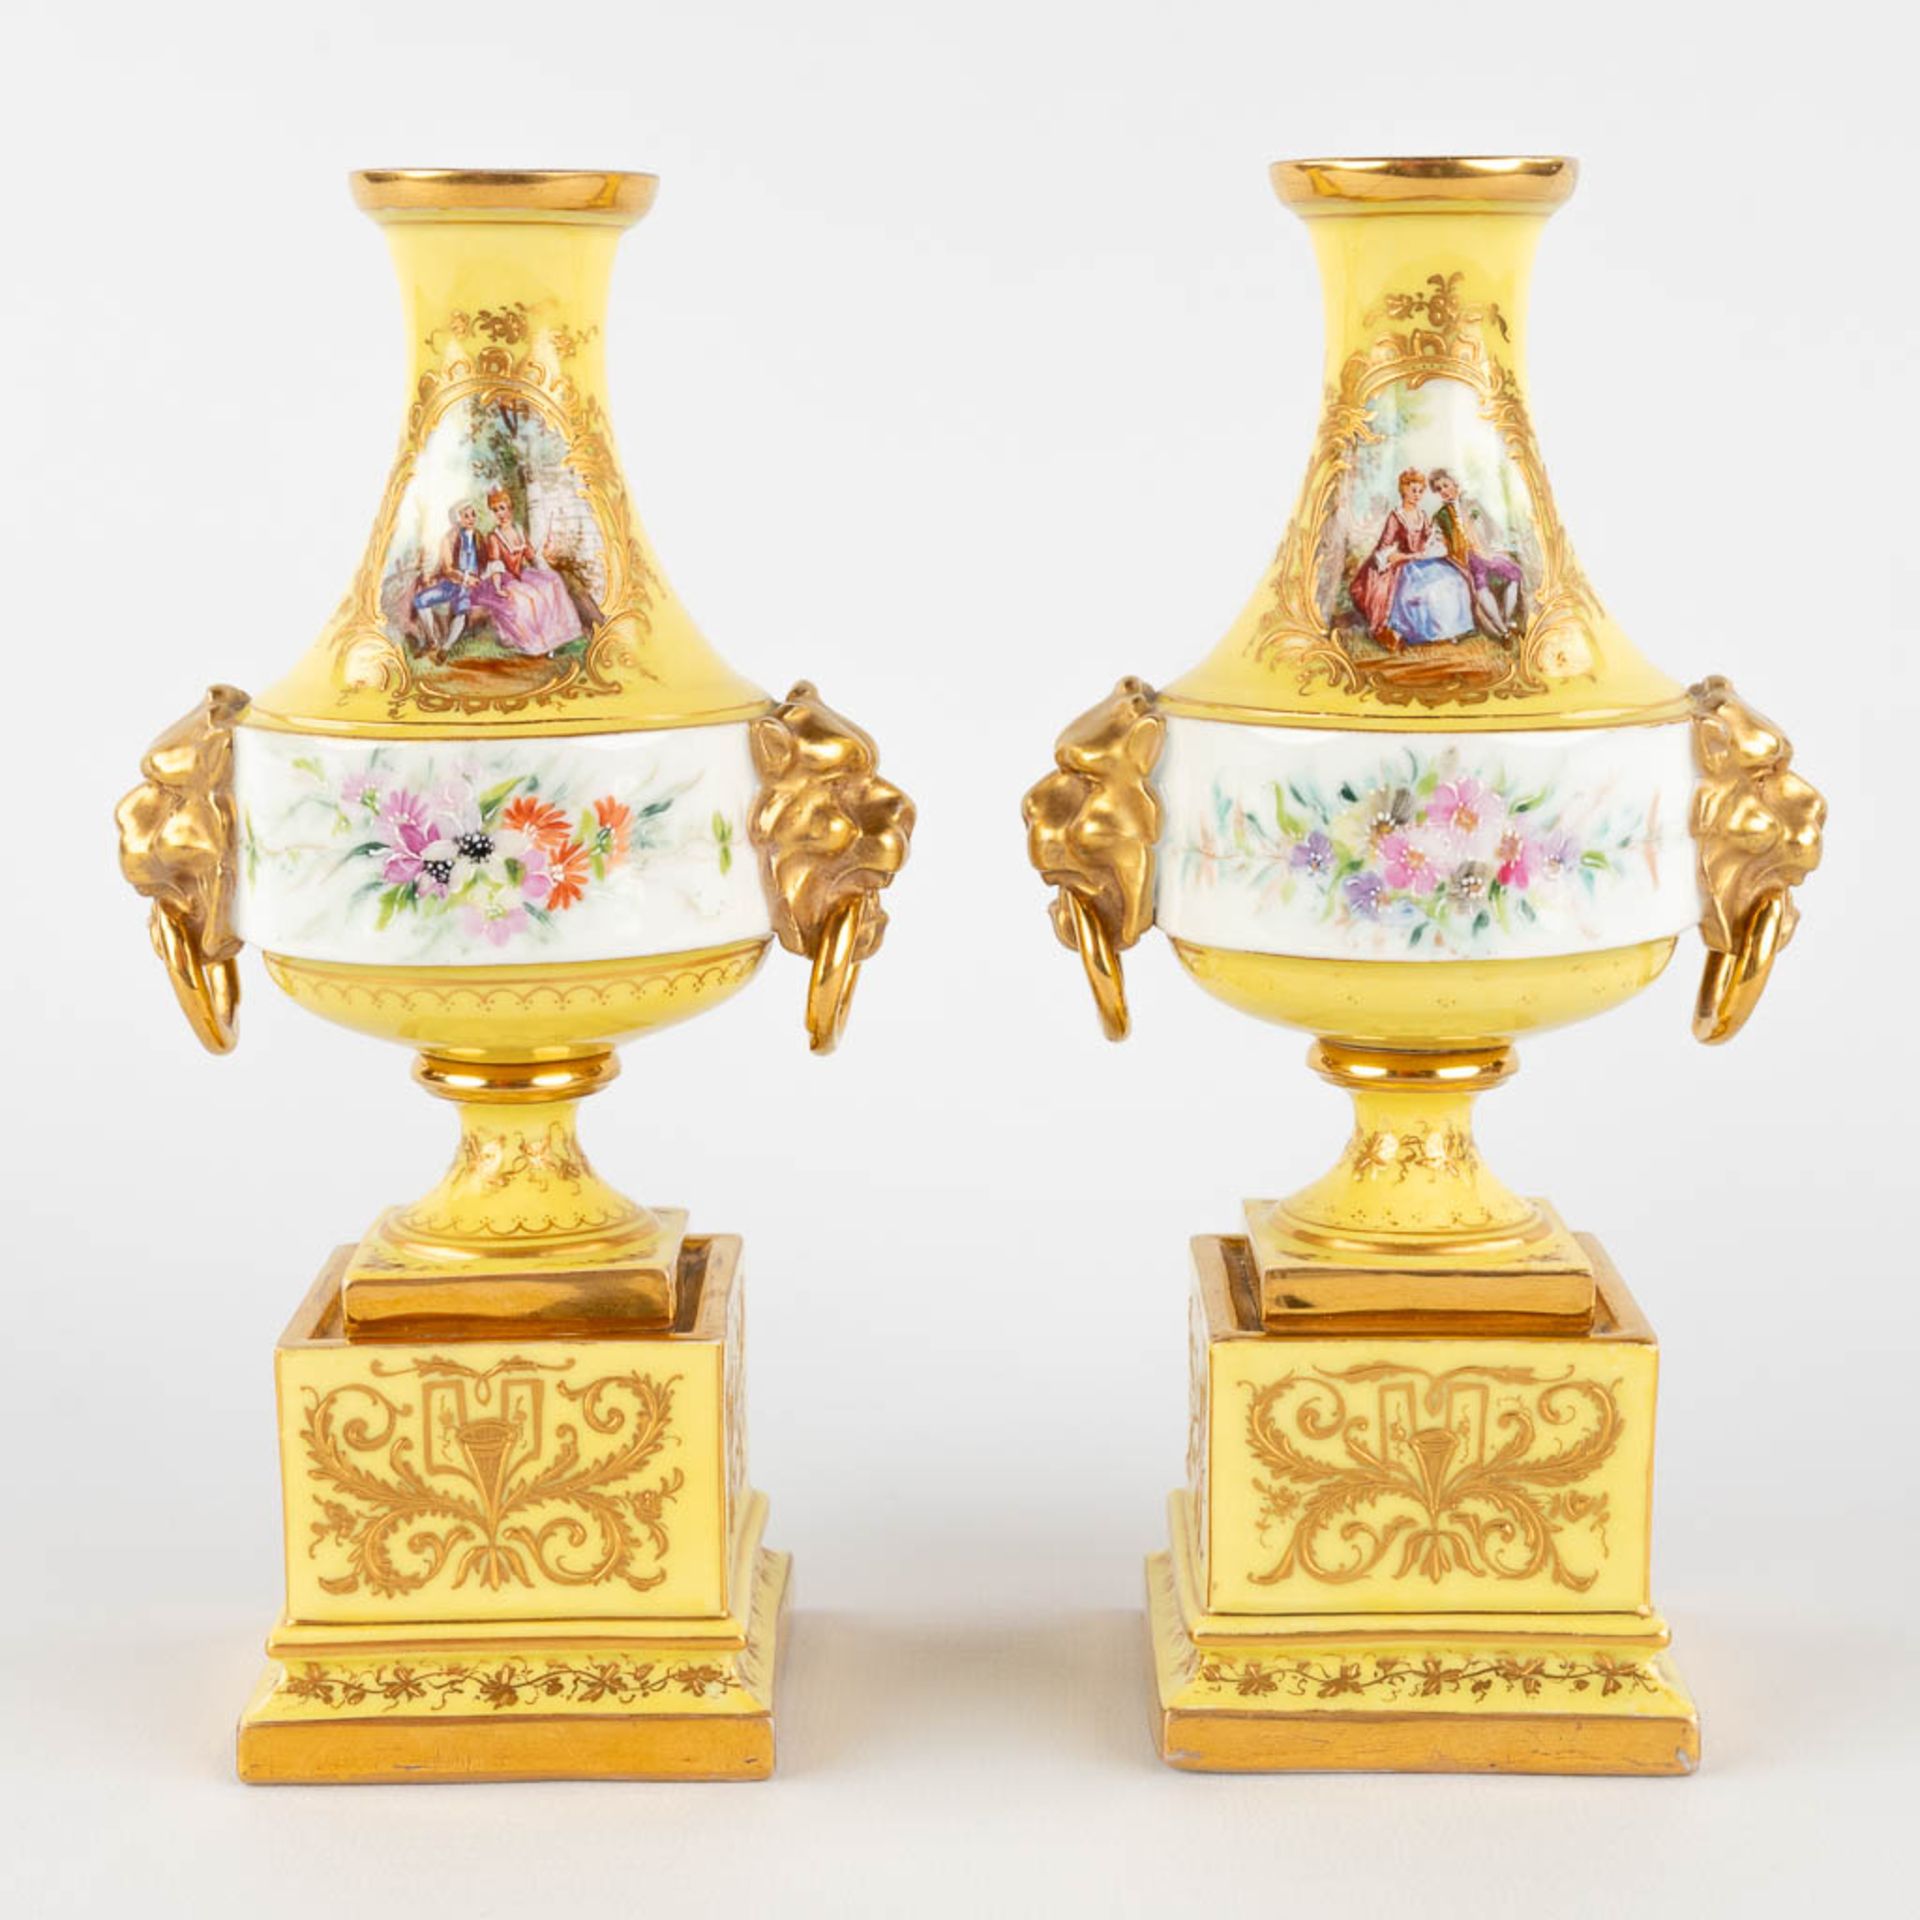 A pair of antique, hand-painted porcelain vases, yellow glaze and flower with lion's heads decor. (L - Image 3 of 16